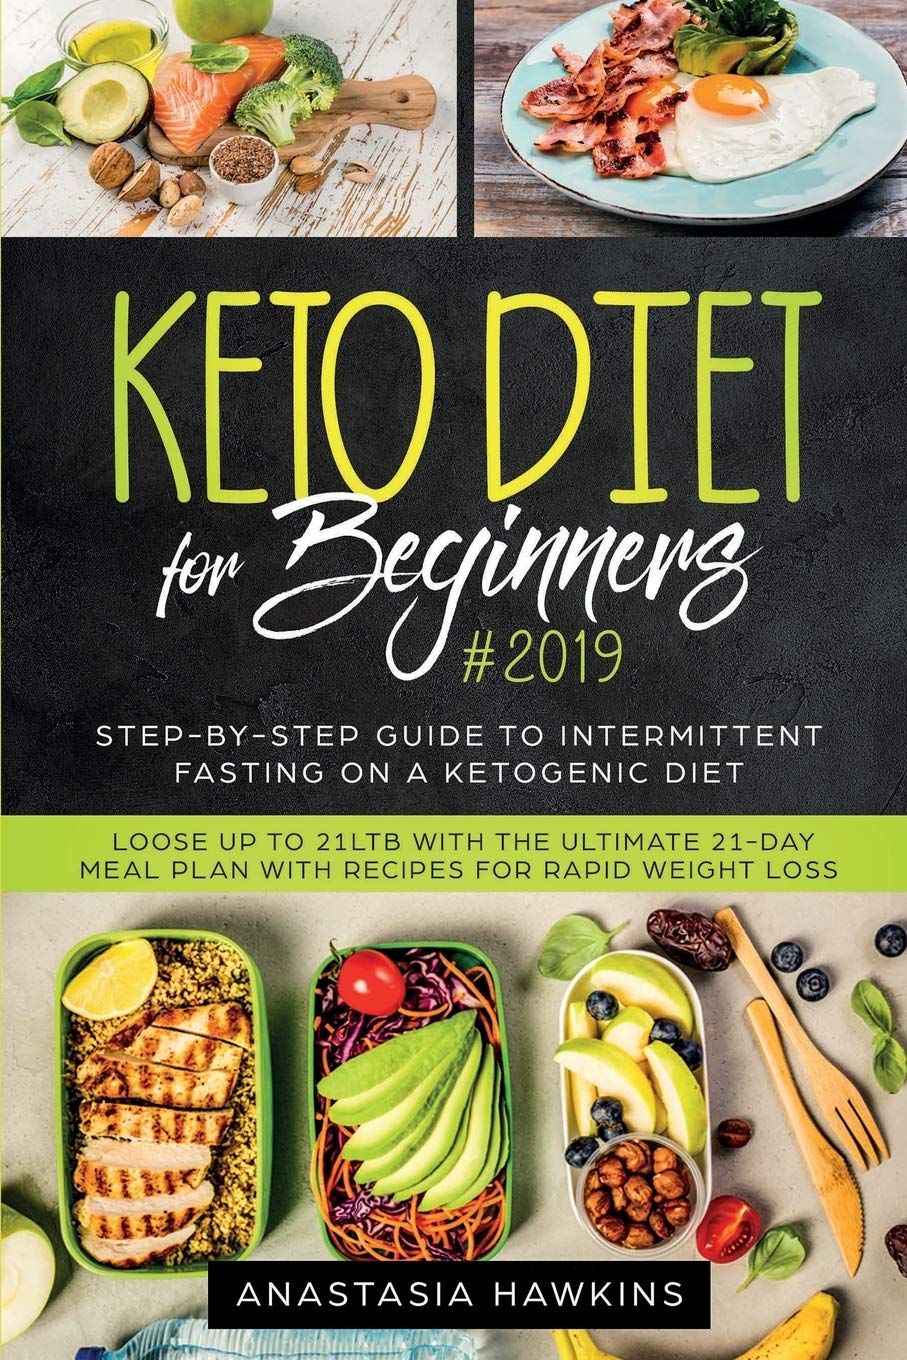 Keto Diet for Beginners: Step-By-step Guide to INTERMITTENT FASTING on a Ketogenic Diet Loose up to 21ltb with the Ultimate 21-Day Meal Plan - SureShot Books Publishing LLC